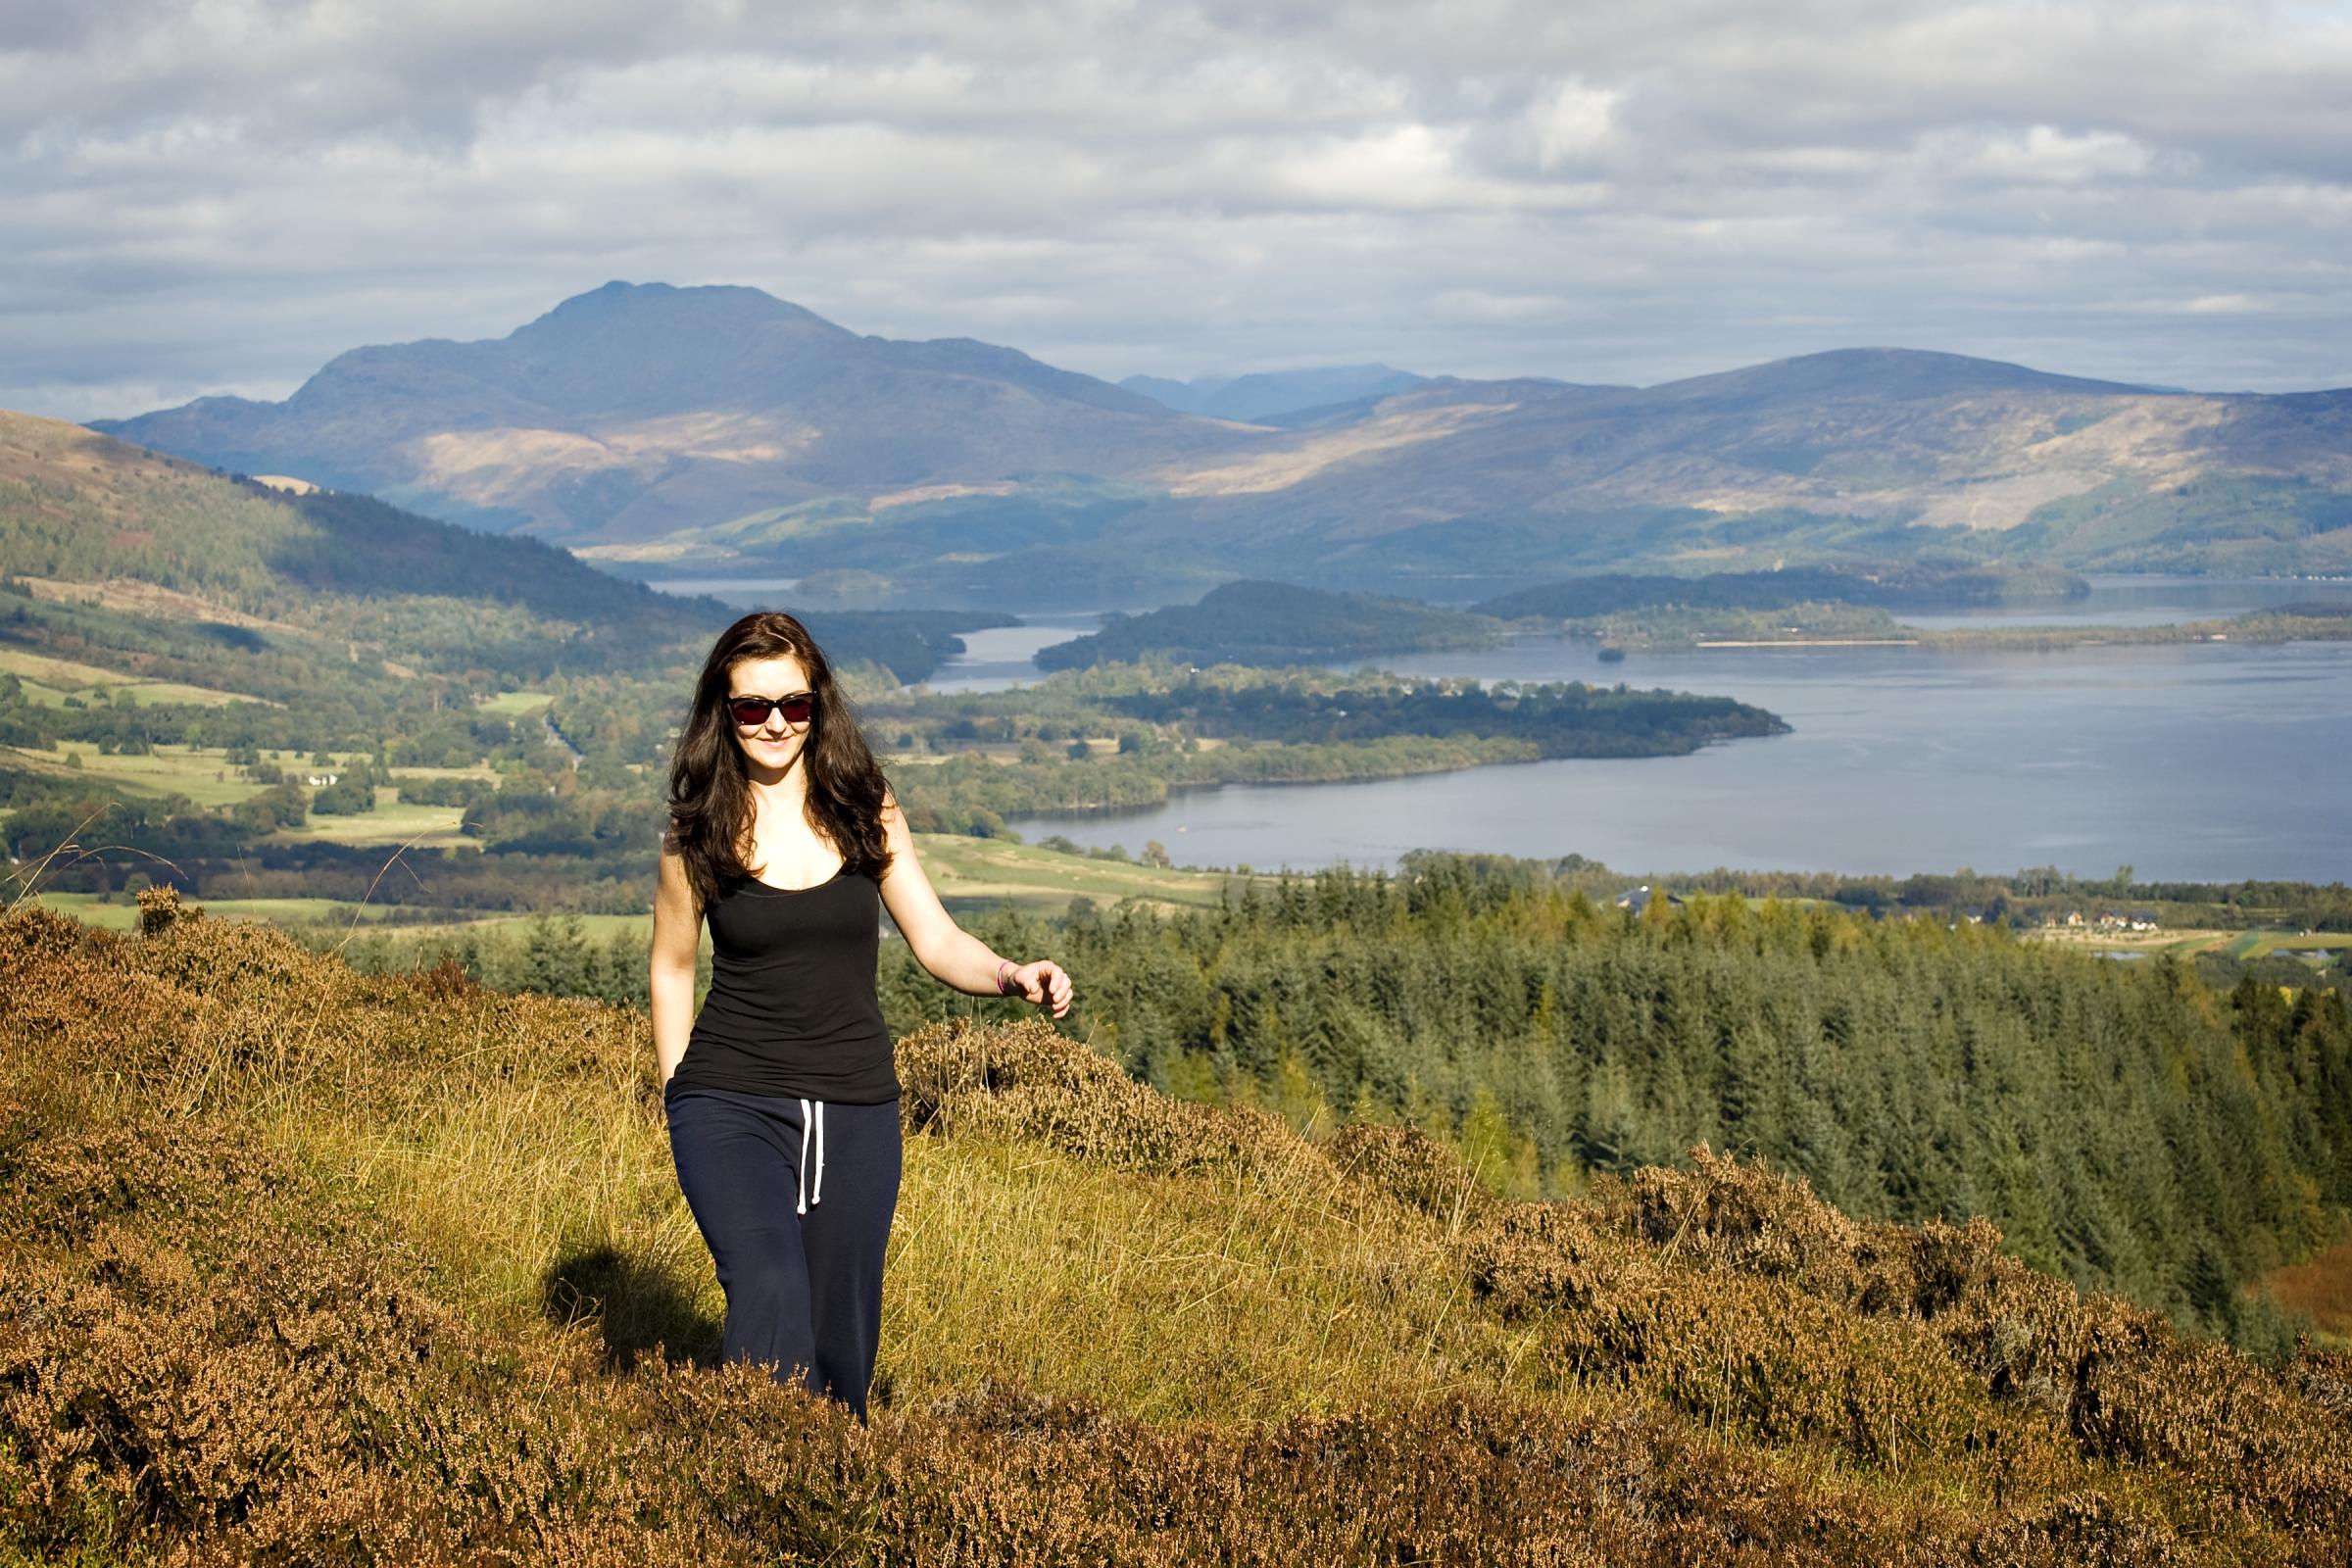 The John Muir Way above Loch Lomond (Pic - Becky Duncan for Scottish Natural Heritage)